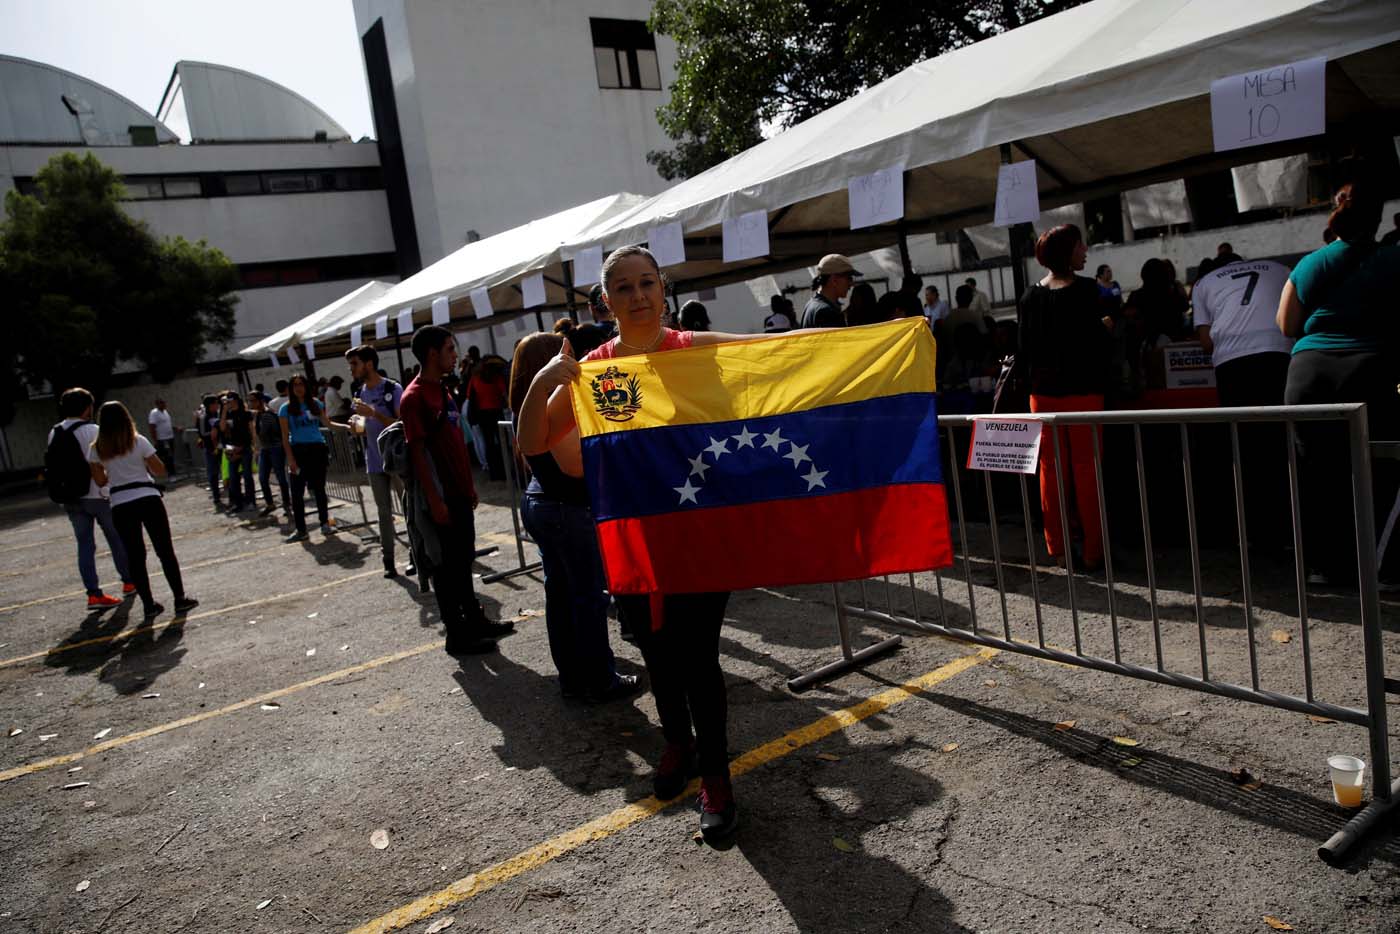 A woman holds a national flag at a polling station during an unofficial plebiscite against Venezuela's President Nicolas Maduro's government and his plan to rewrite the constitution, in Caracas, Venezuela July 16, 2017. REUTERS/Carlos Garcia Rawlins